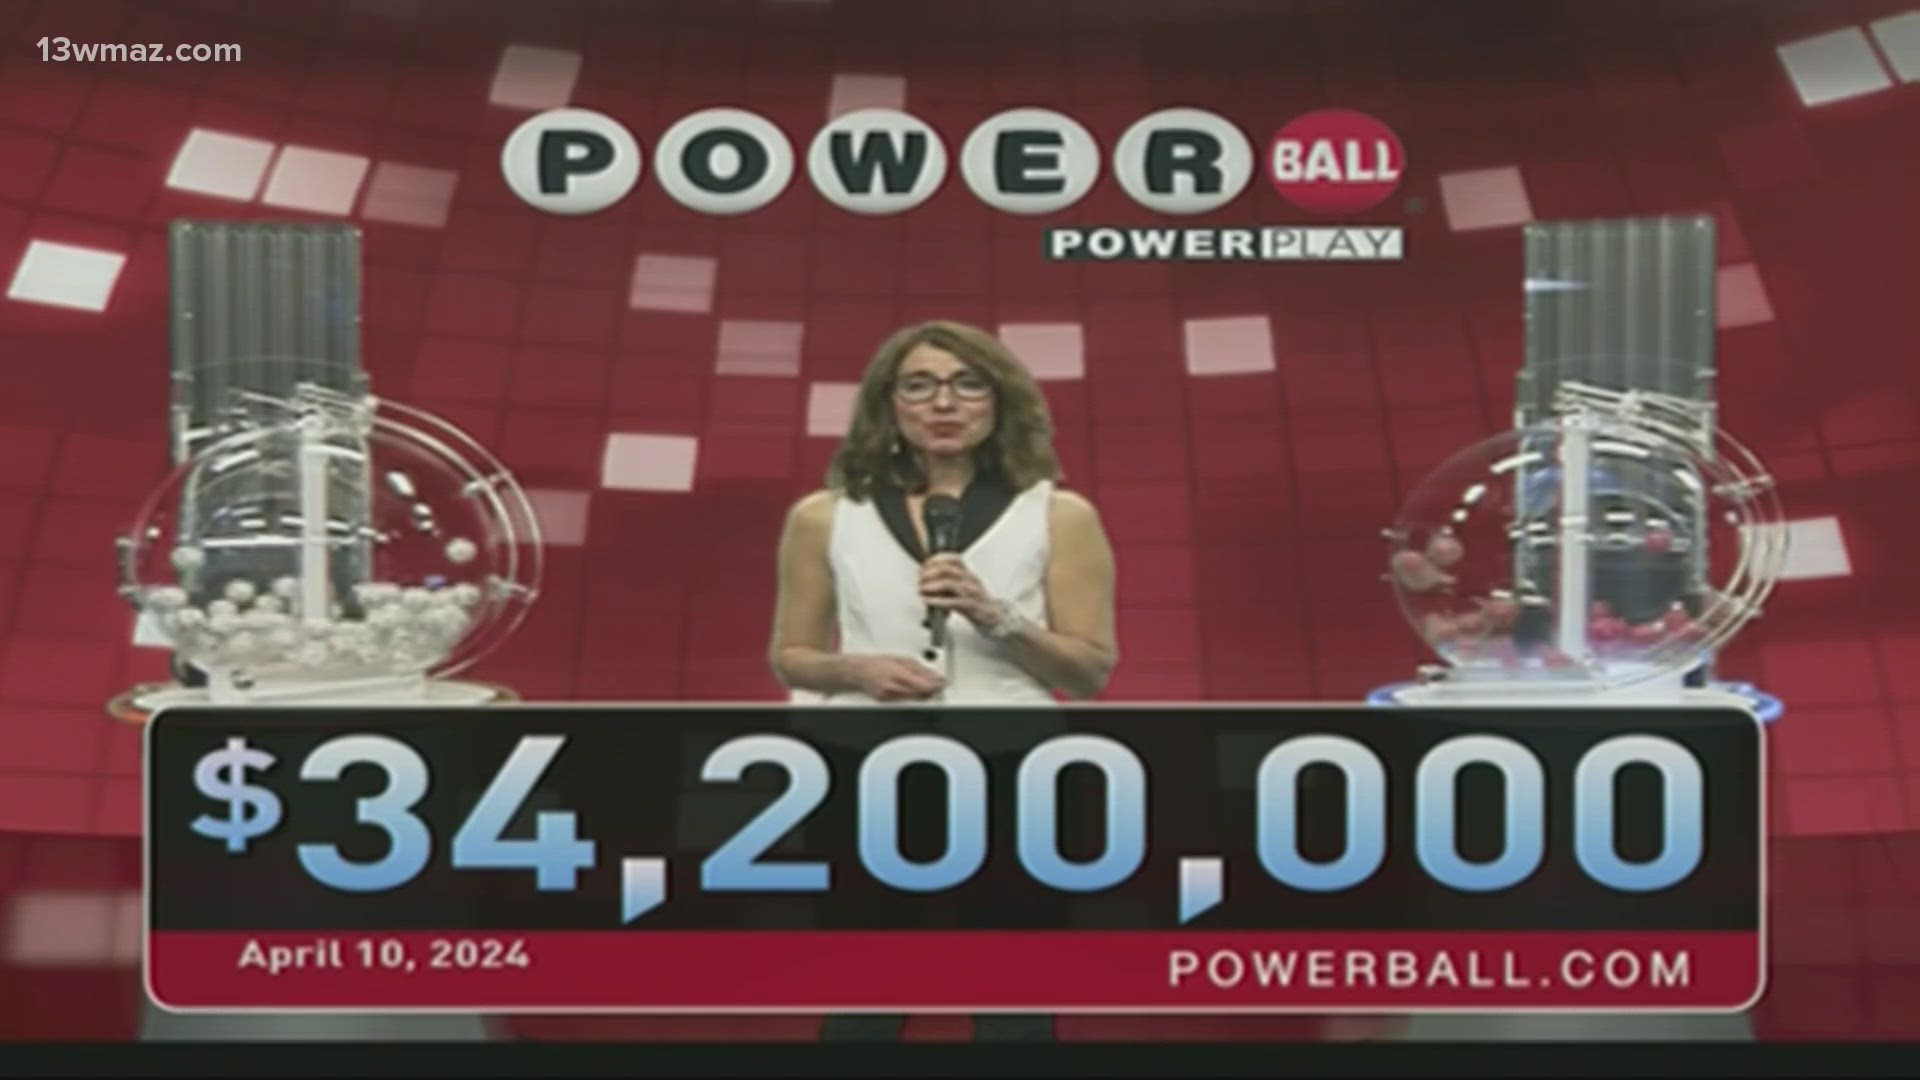 Here are your winning Powerball Numbers for April 10, 2024's $34.2 million jackpot. What would you do with that kind of money